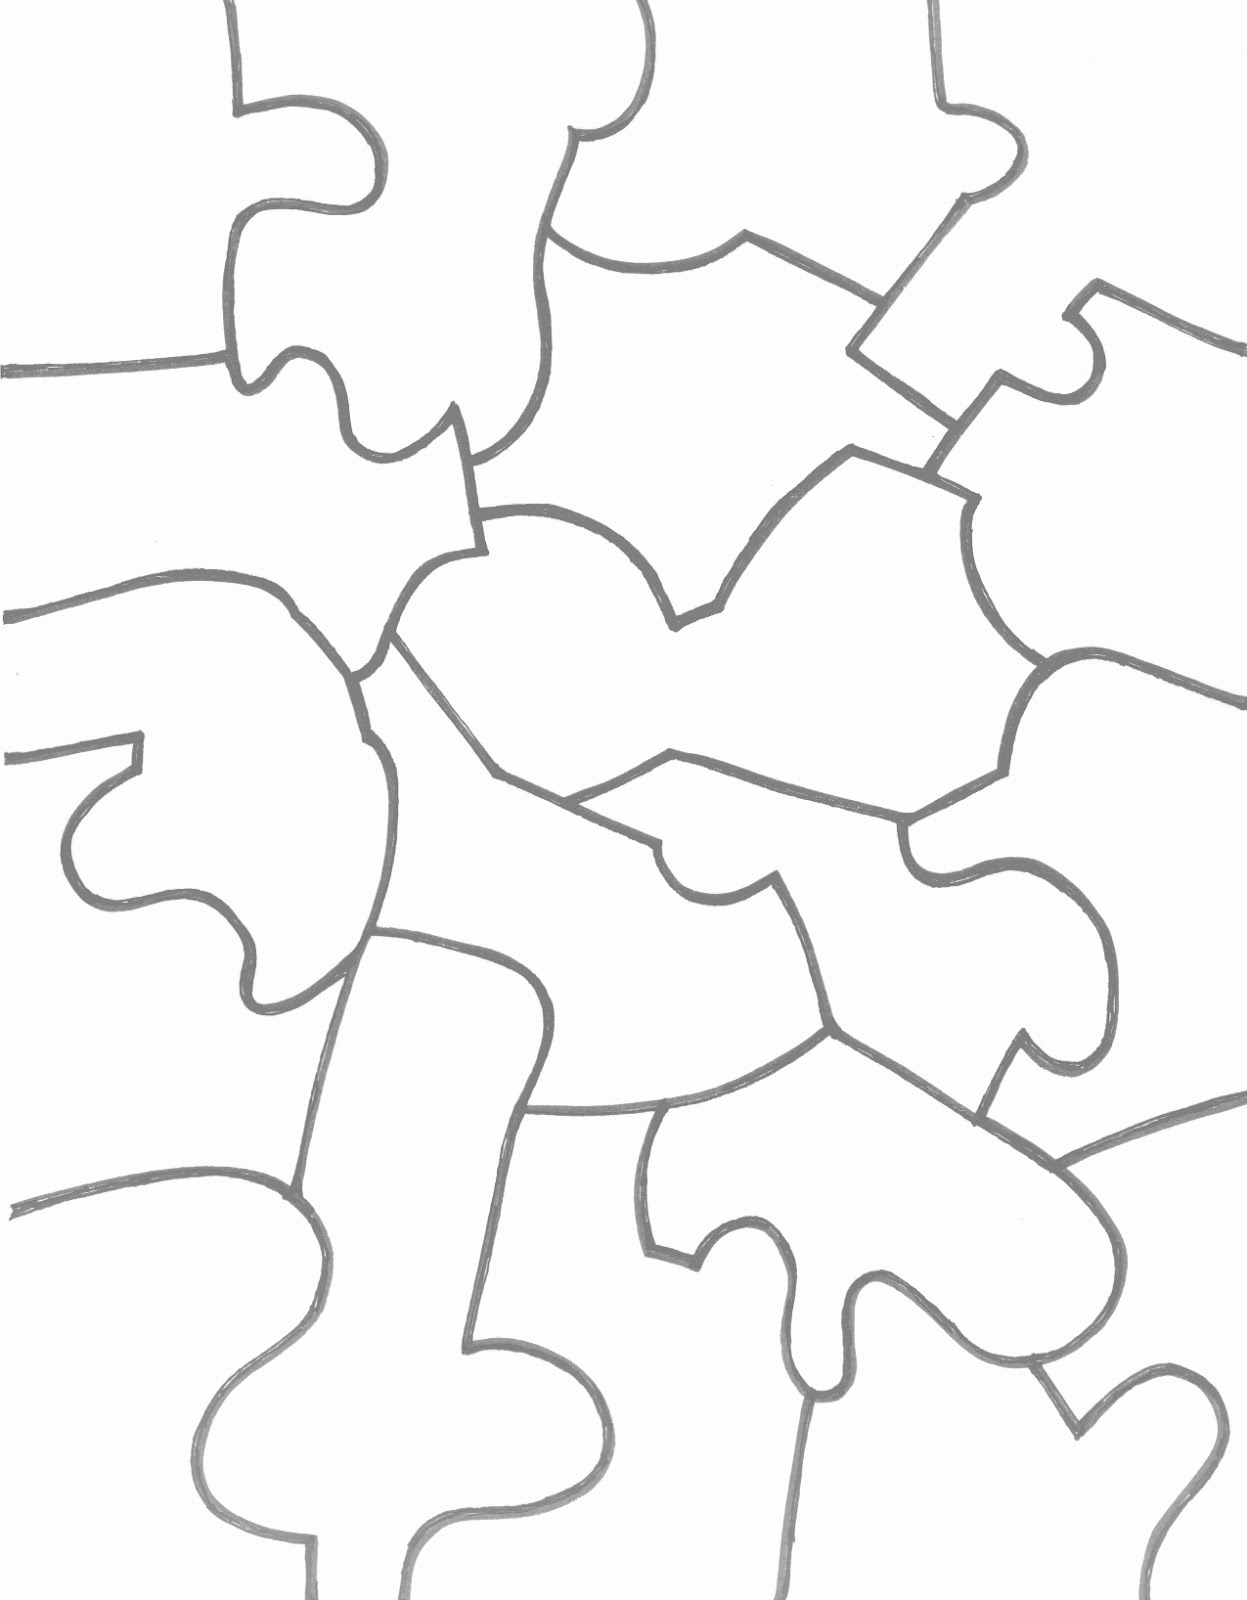 Jigsaw Puzzle Template